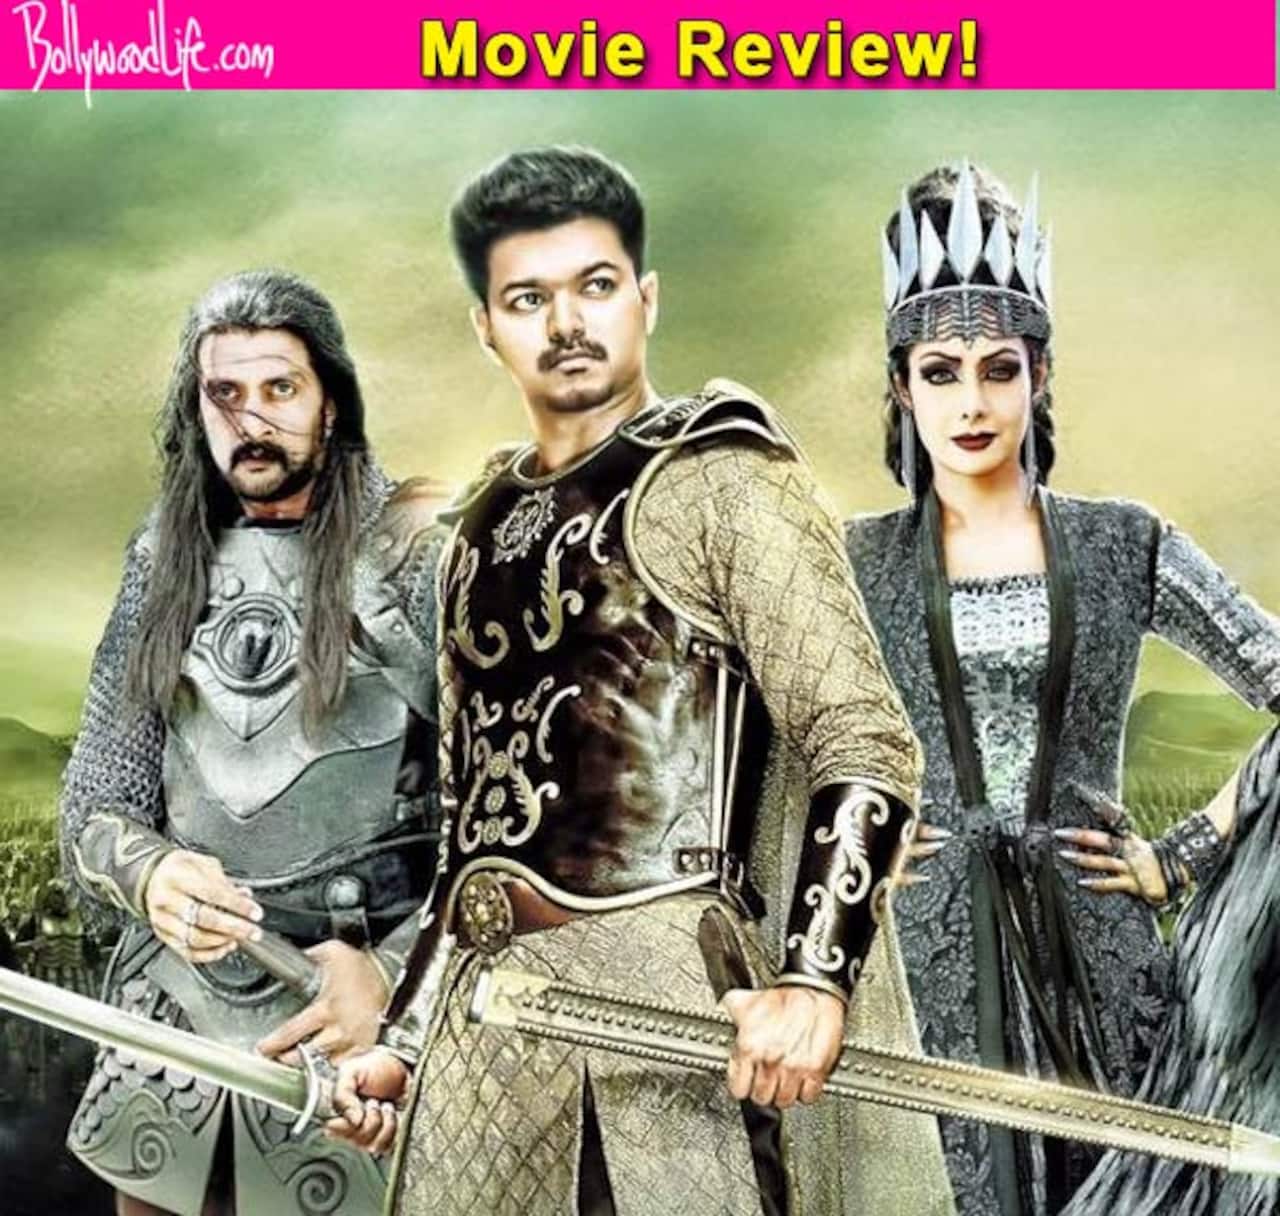 Puli movie review: Even a die hard Vijay fan should stay away from this unintentionally hilarious fantasy film!